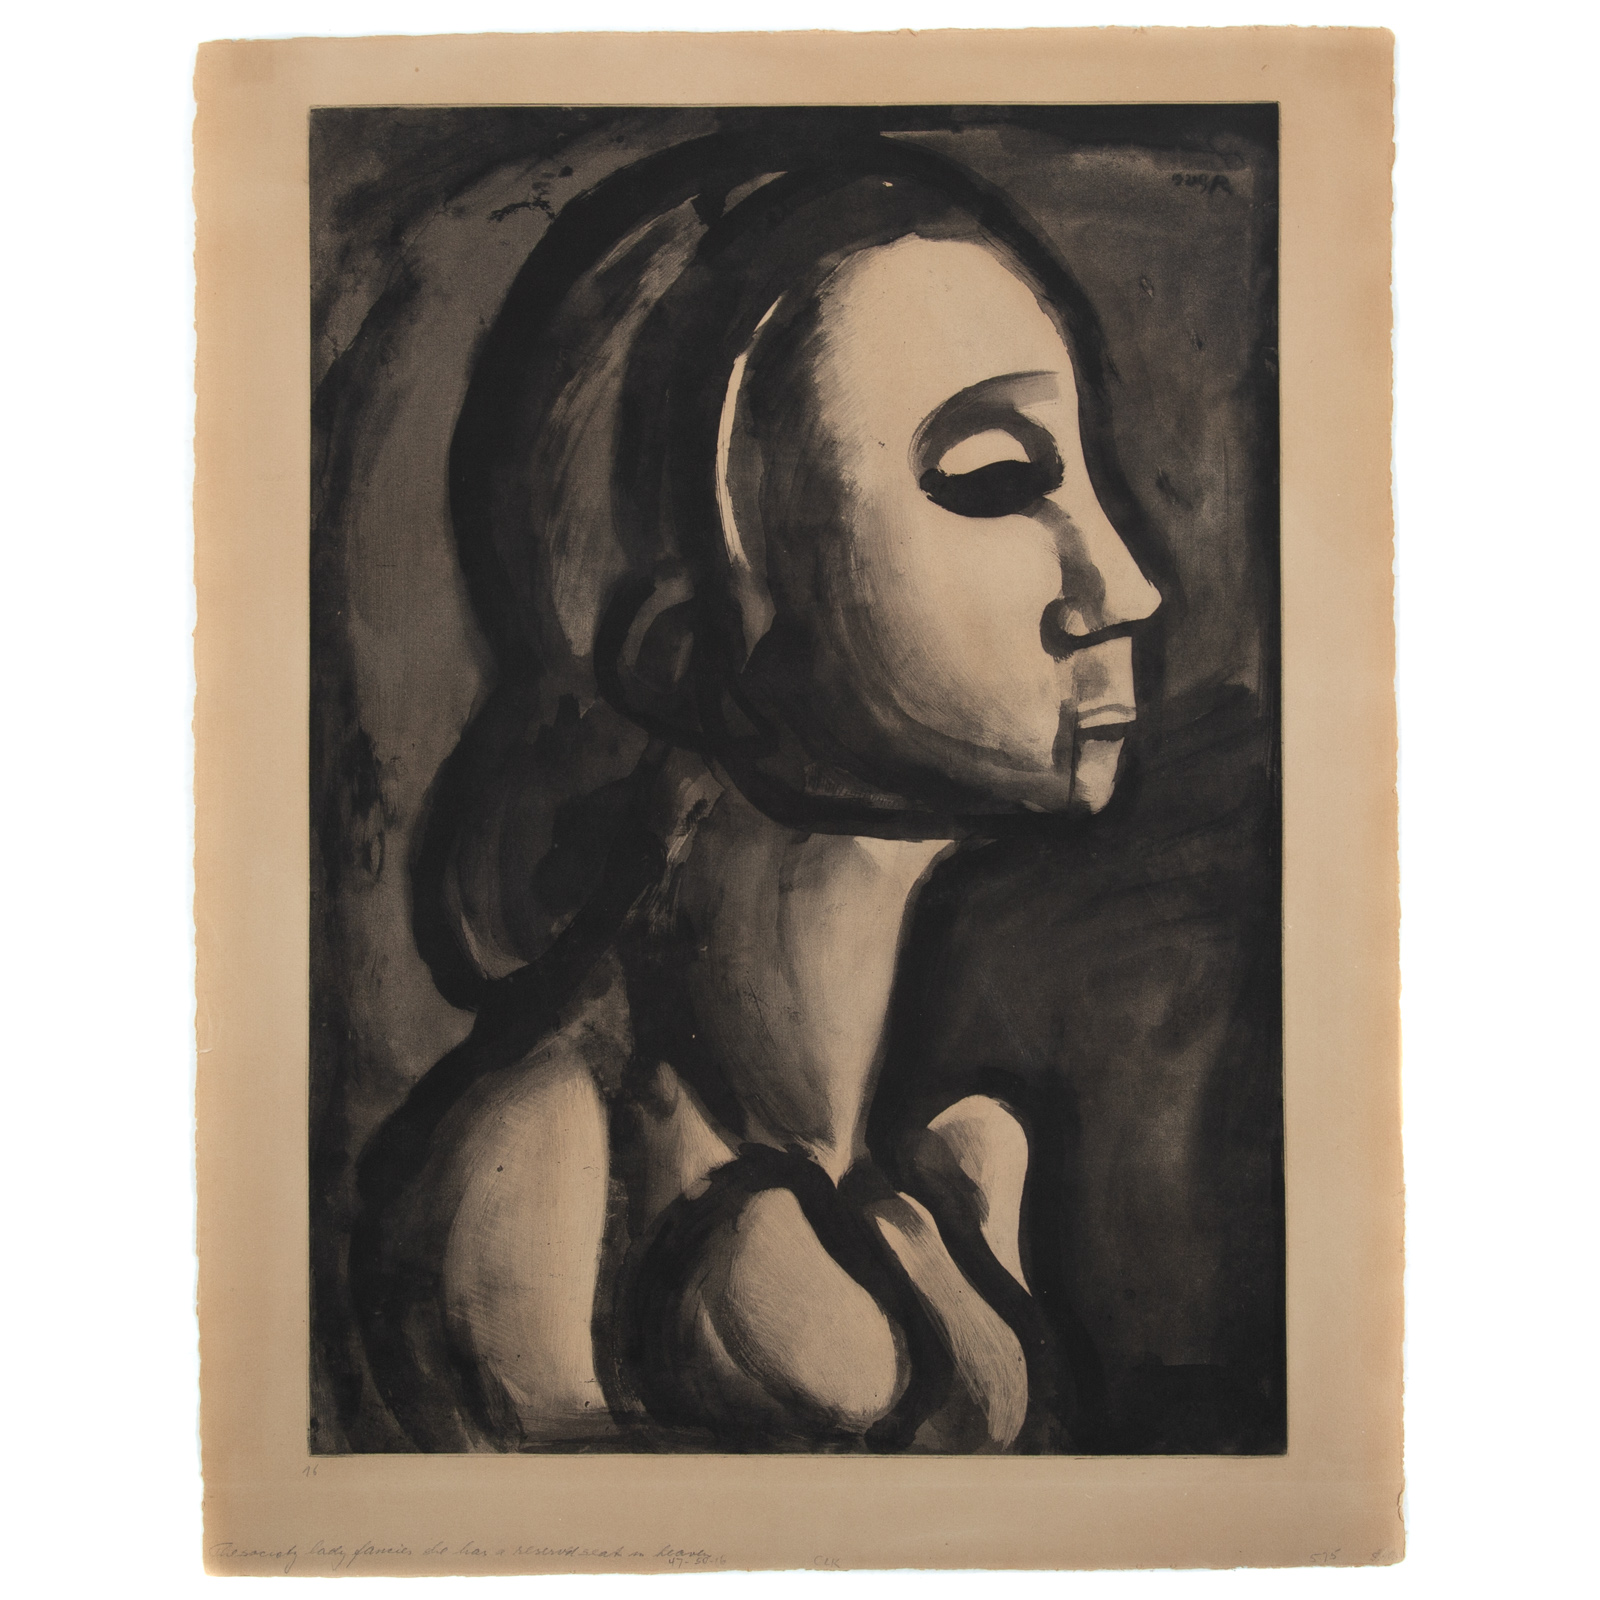 GEORGES ROUAULT. FROM MISERIE,